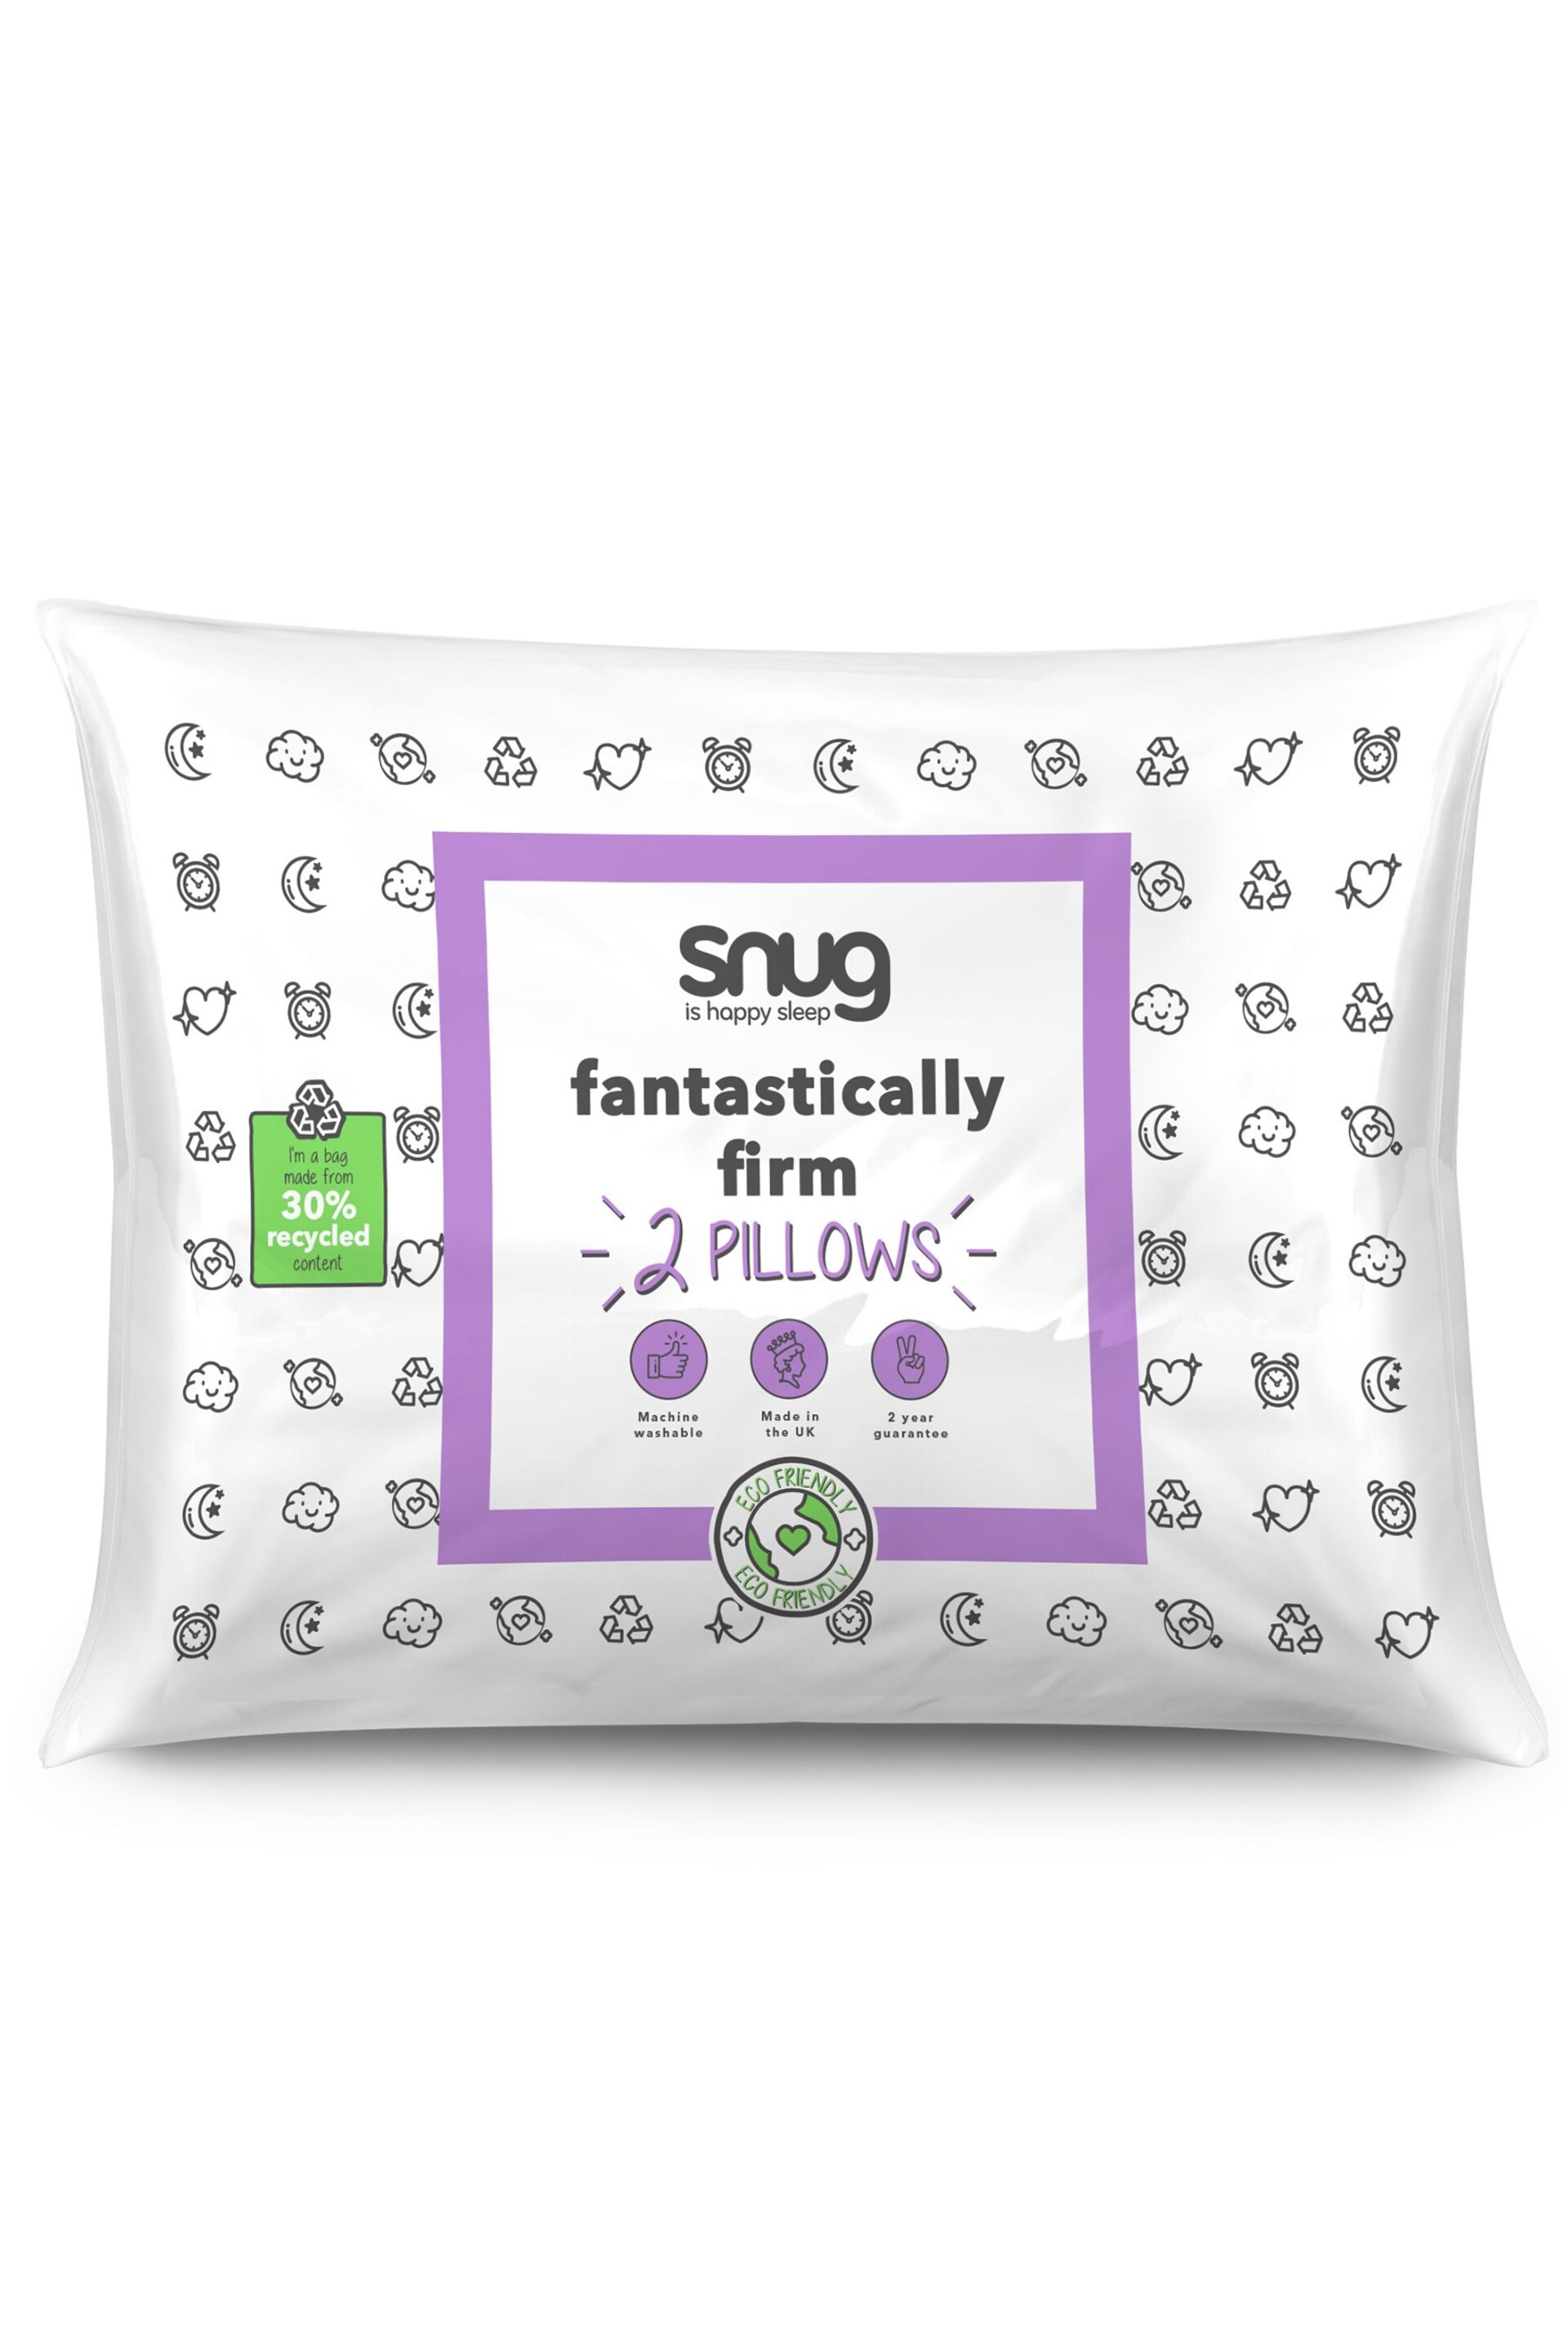 Snug Fantastically Firm Pillows - 2 Pack - Image 6 of 10